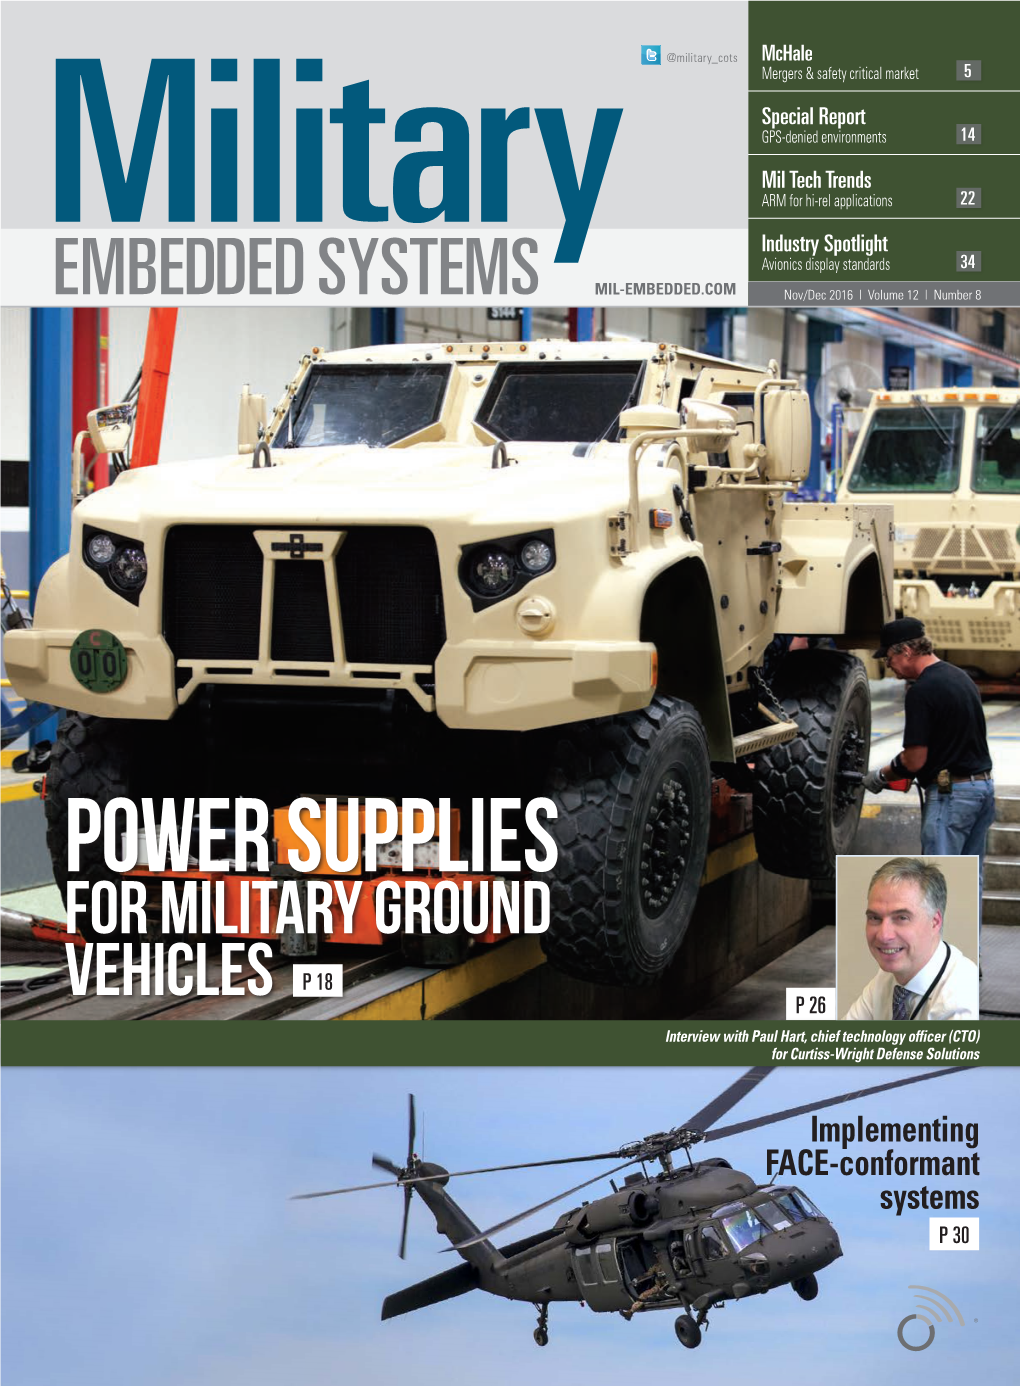 Power Supplies for Military Ground Vehicles P 18 P 26 Interview with Paul Hart, Chief Technology Officer (CTO) for Curtiss-Wright Defense Solutions